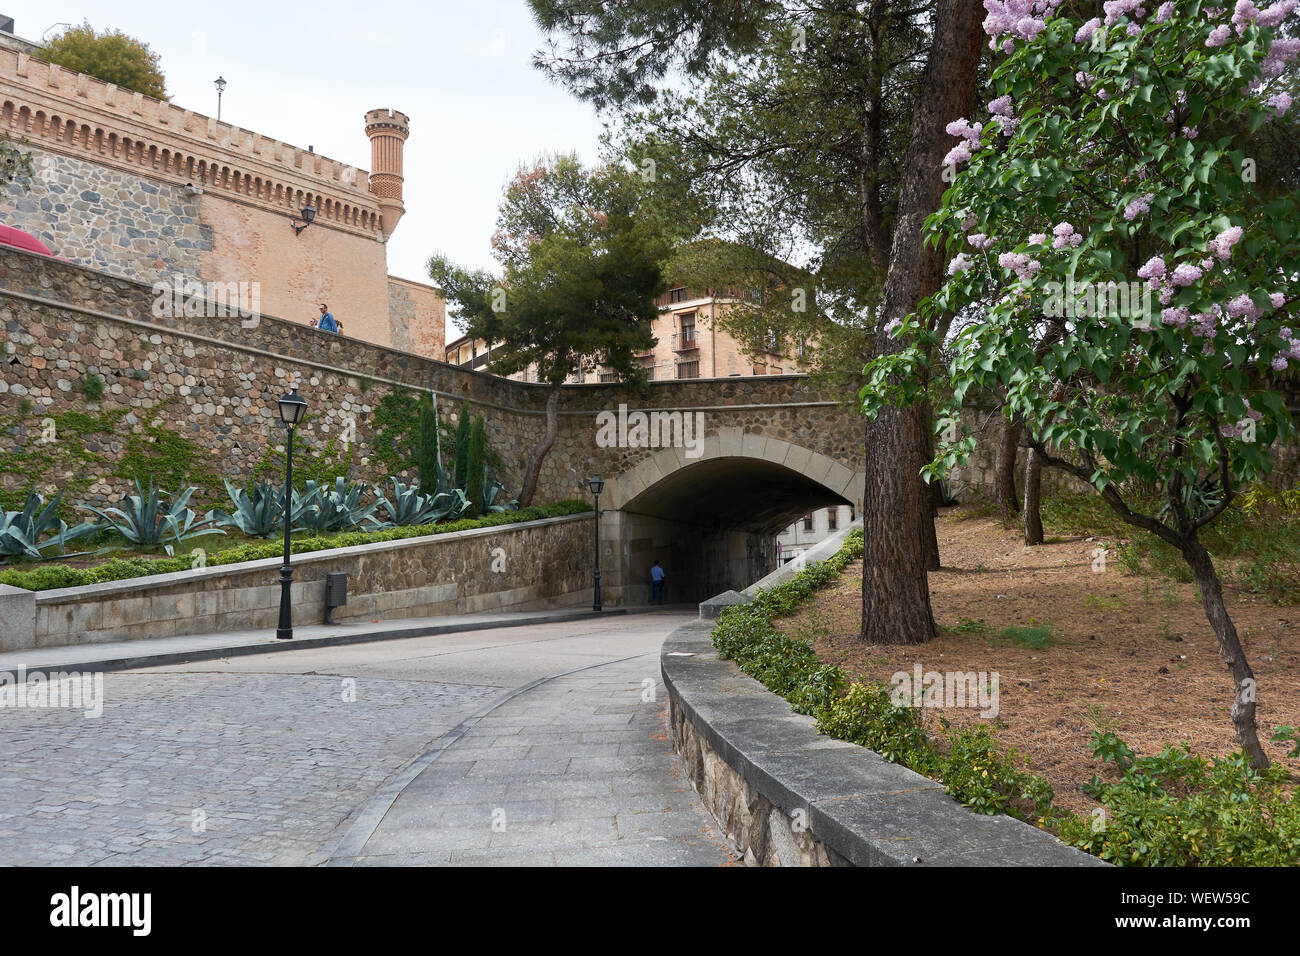 TOLEDO, SPAIN - APRIL 24, 2018: Picturesque street in toledo with cobblestoned bridge and view of the walls of the Alcazar. Stock Photo